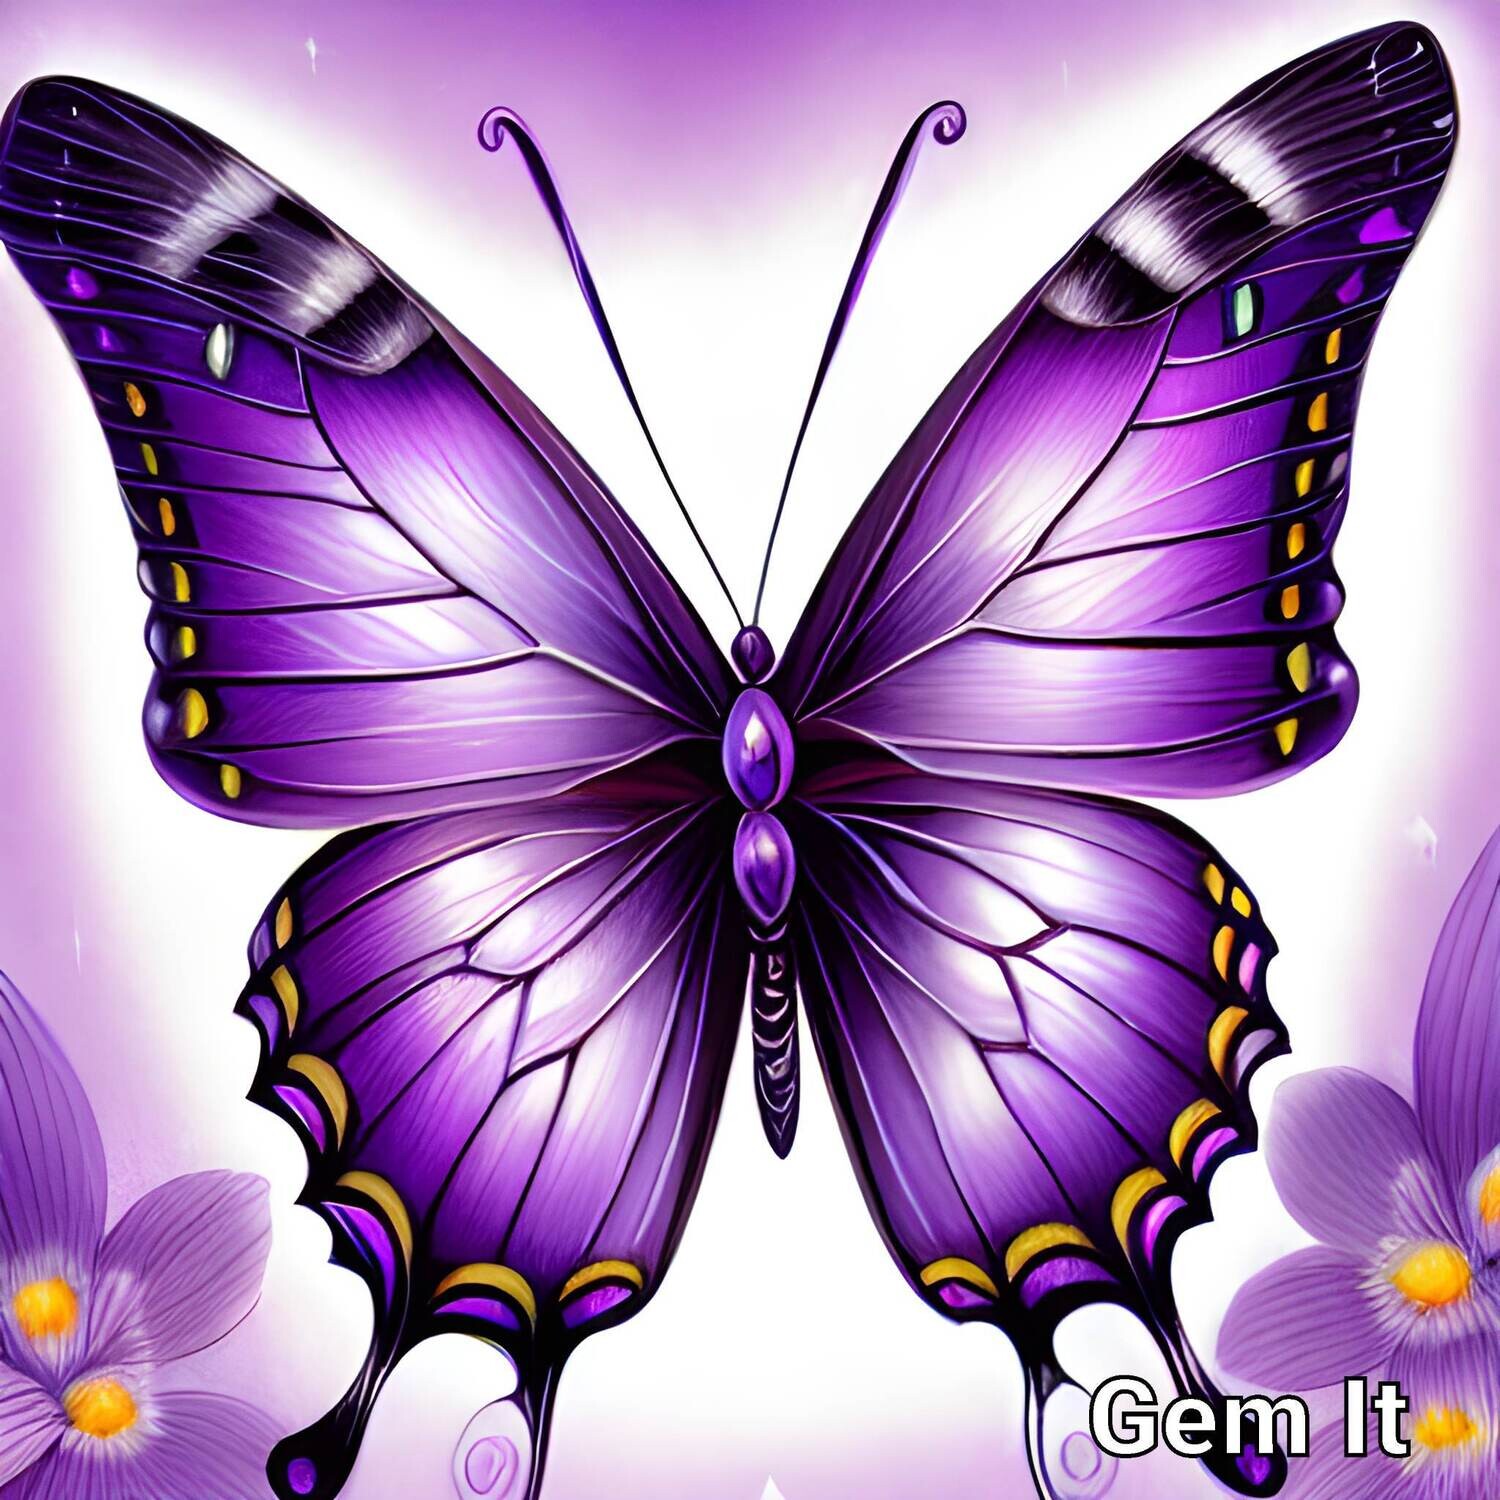 Big Butterfly 1 - Full Drill Diamond Painting - Specially ordered for you. Delivery is approximately 4 - 6 weeks.